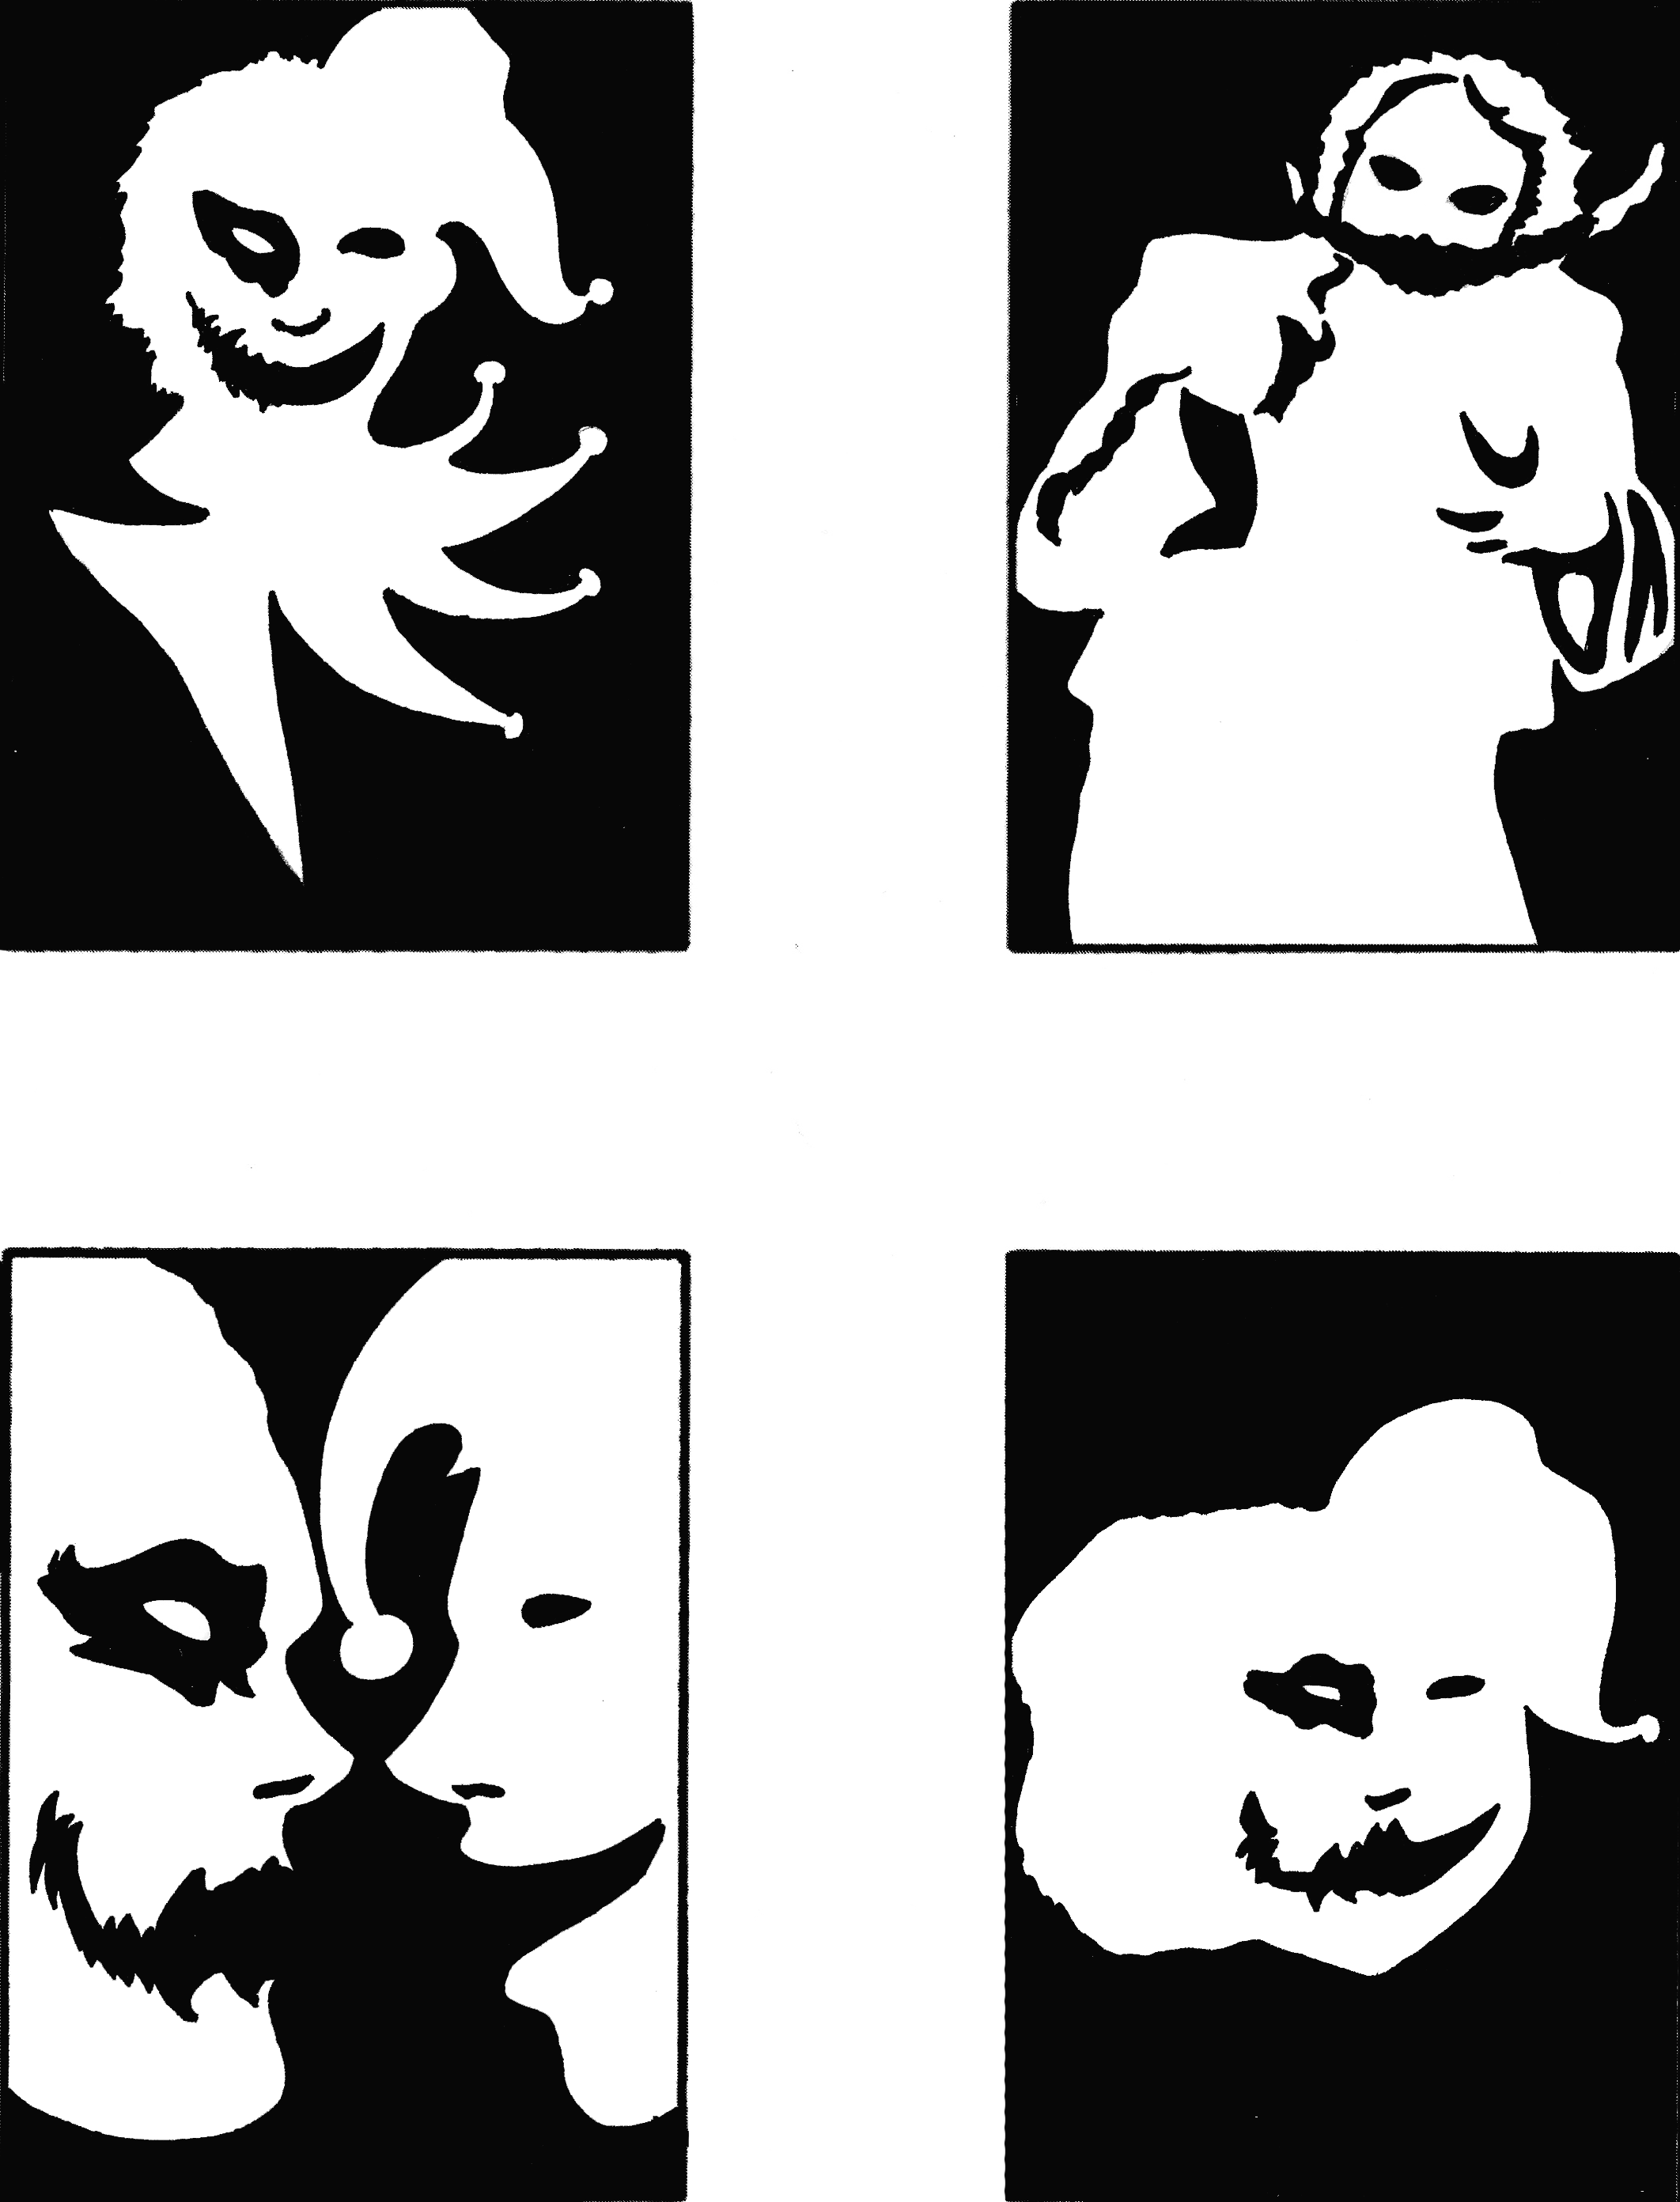 Thumbnails of simplified, 'self-explanatory' visuals for the word 'Joker'